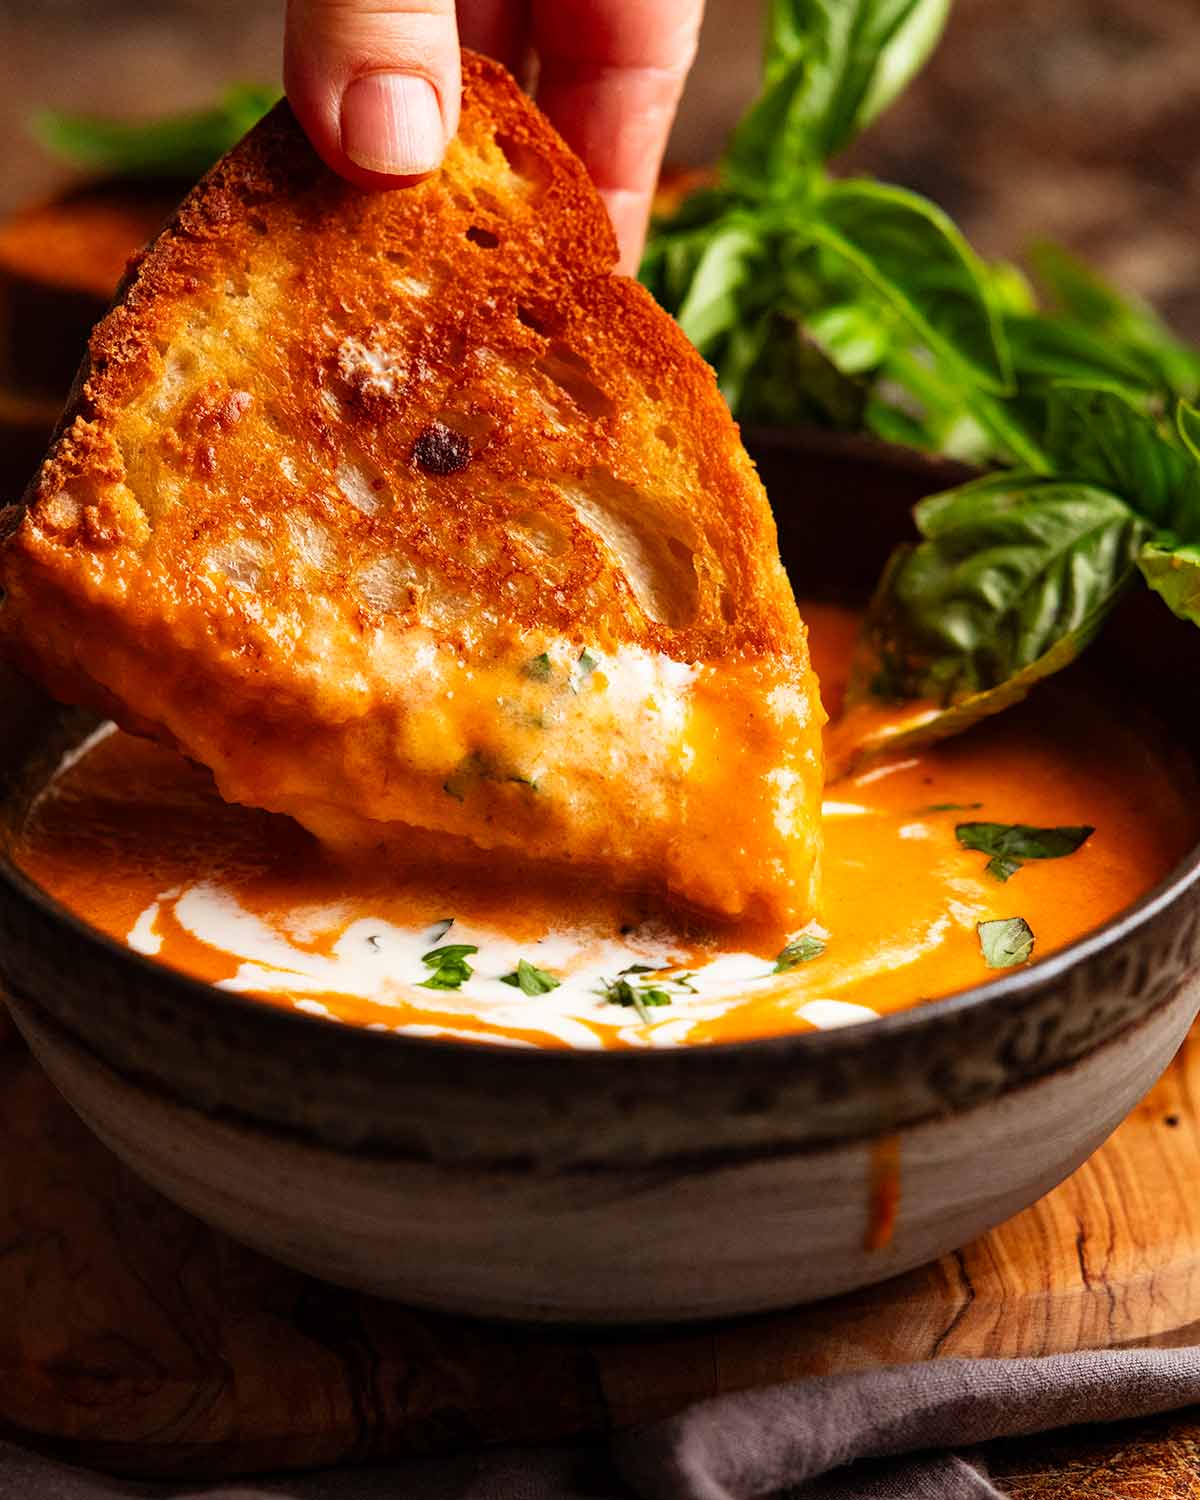 Dunnking grilled cheese into roasted tomato soup